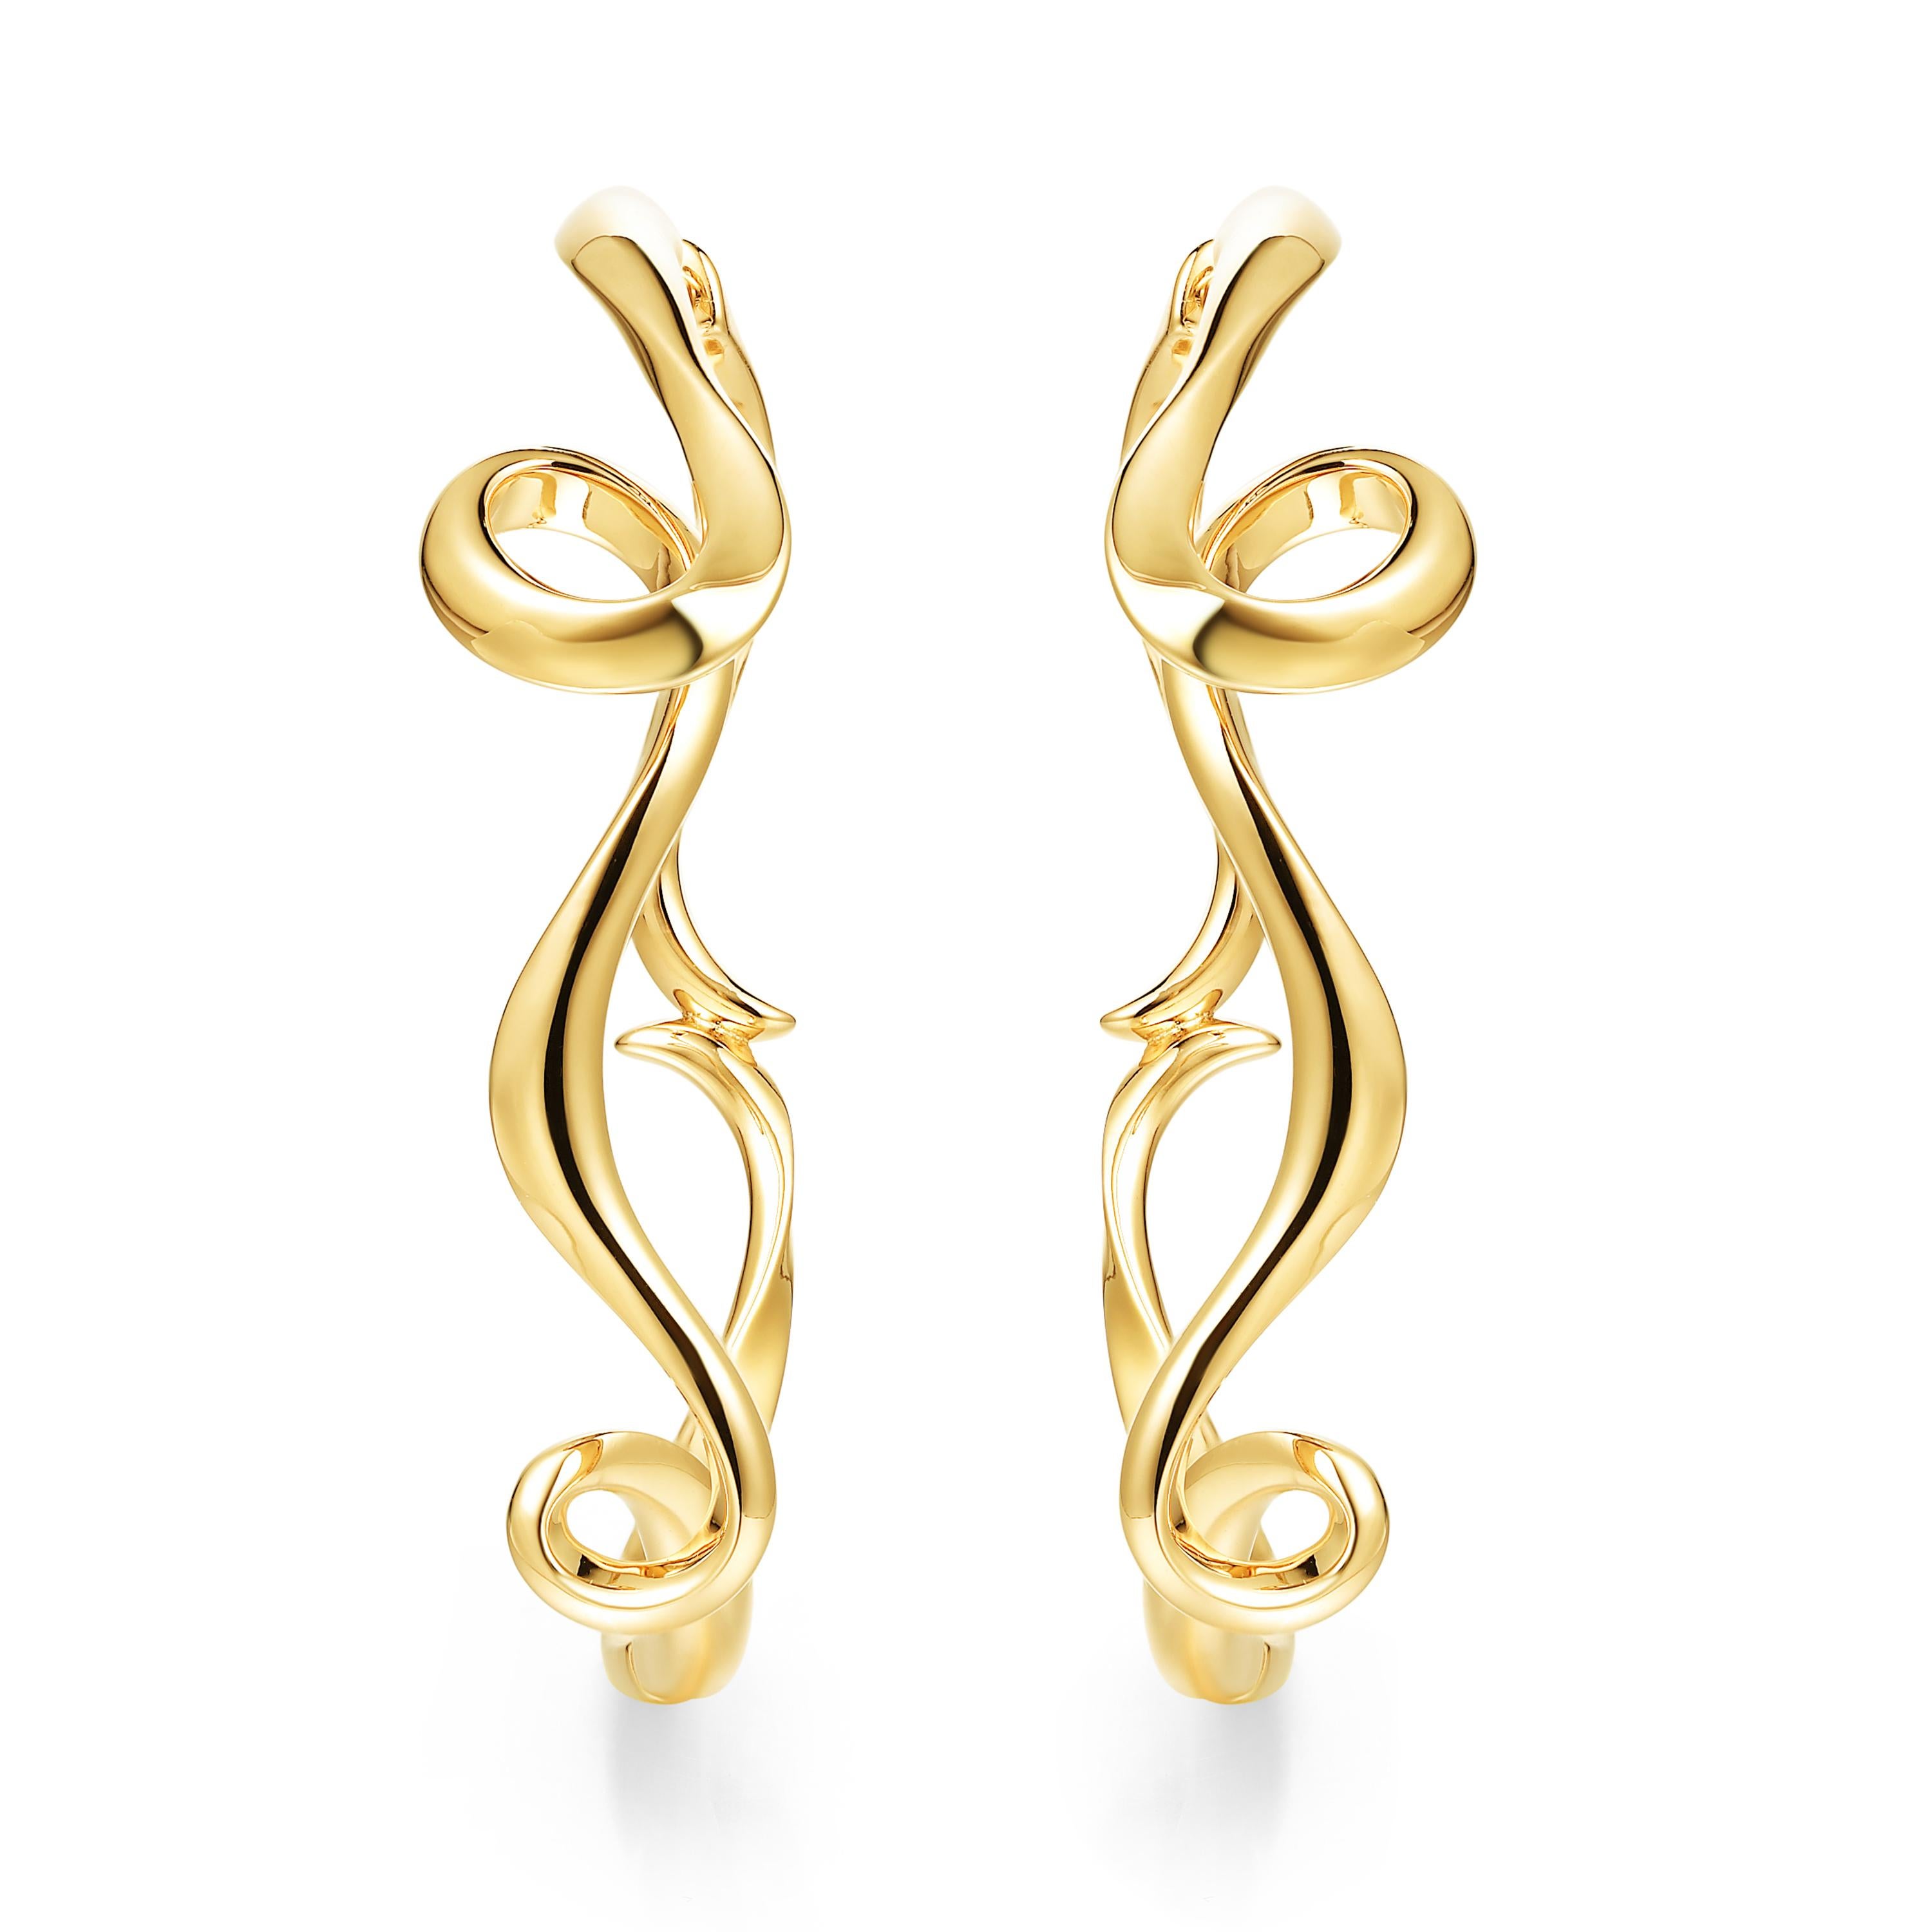 Description:
Serenity large hoop earrings in 18ct yellow gold plated on sterling silver.

Inspiration:
Serenity is a collection in sterling silver, inspired by the flow and curves of the smoke of incense. Promoting a calm and peaceful environment,